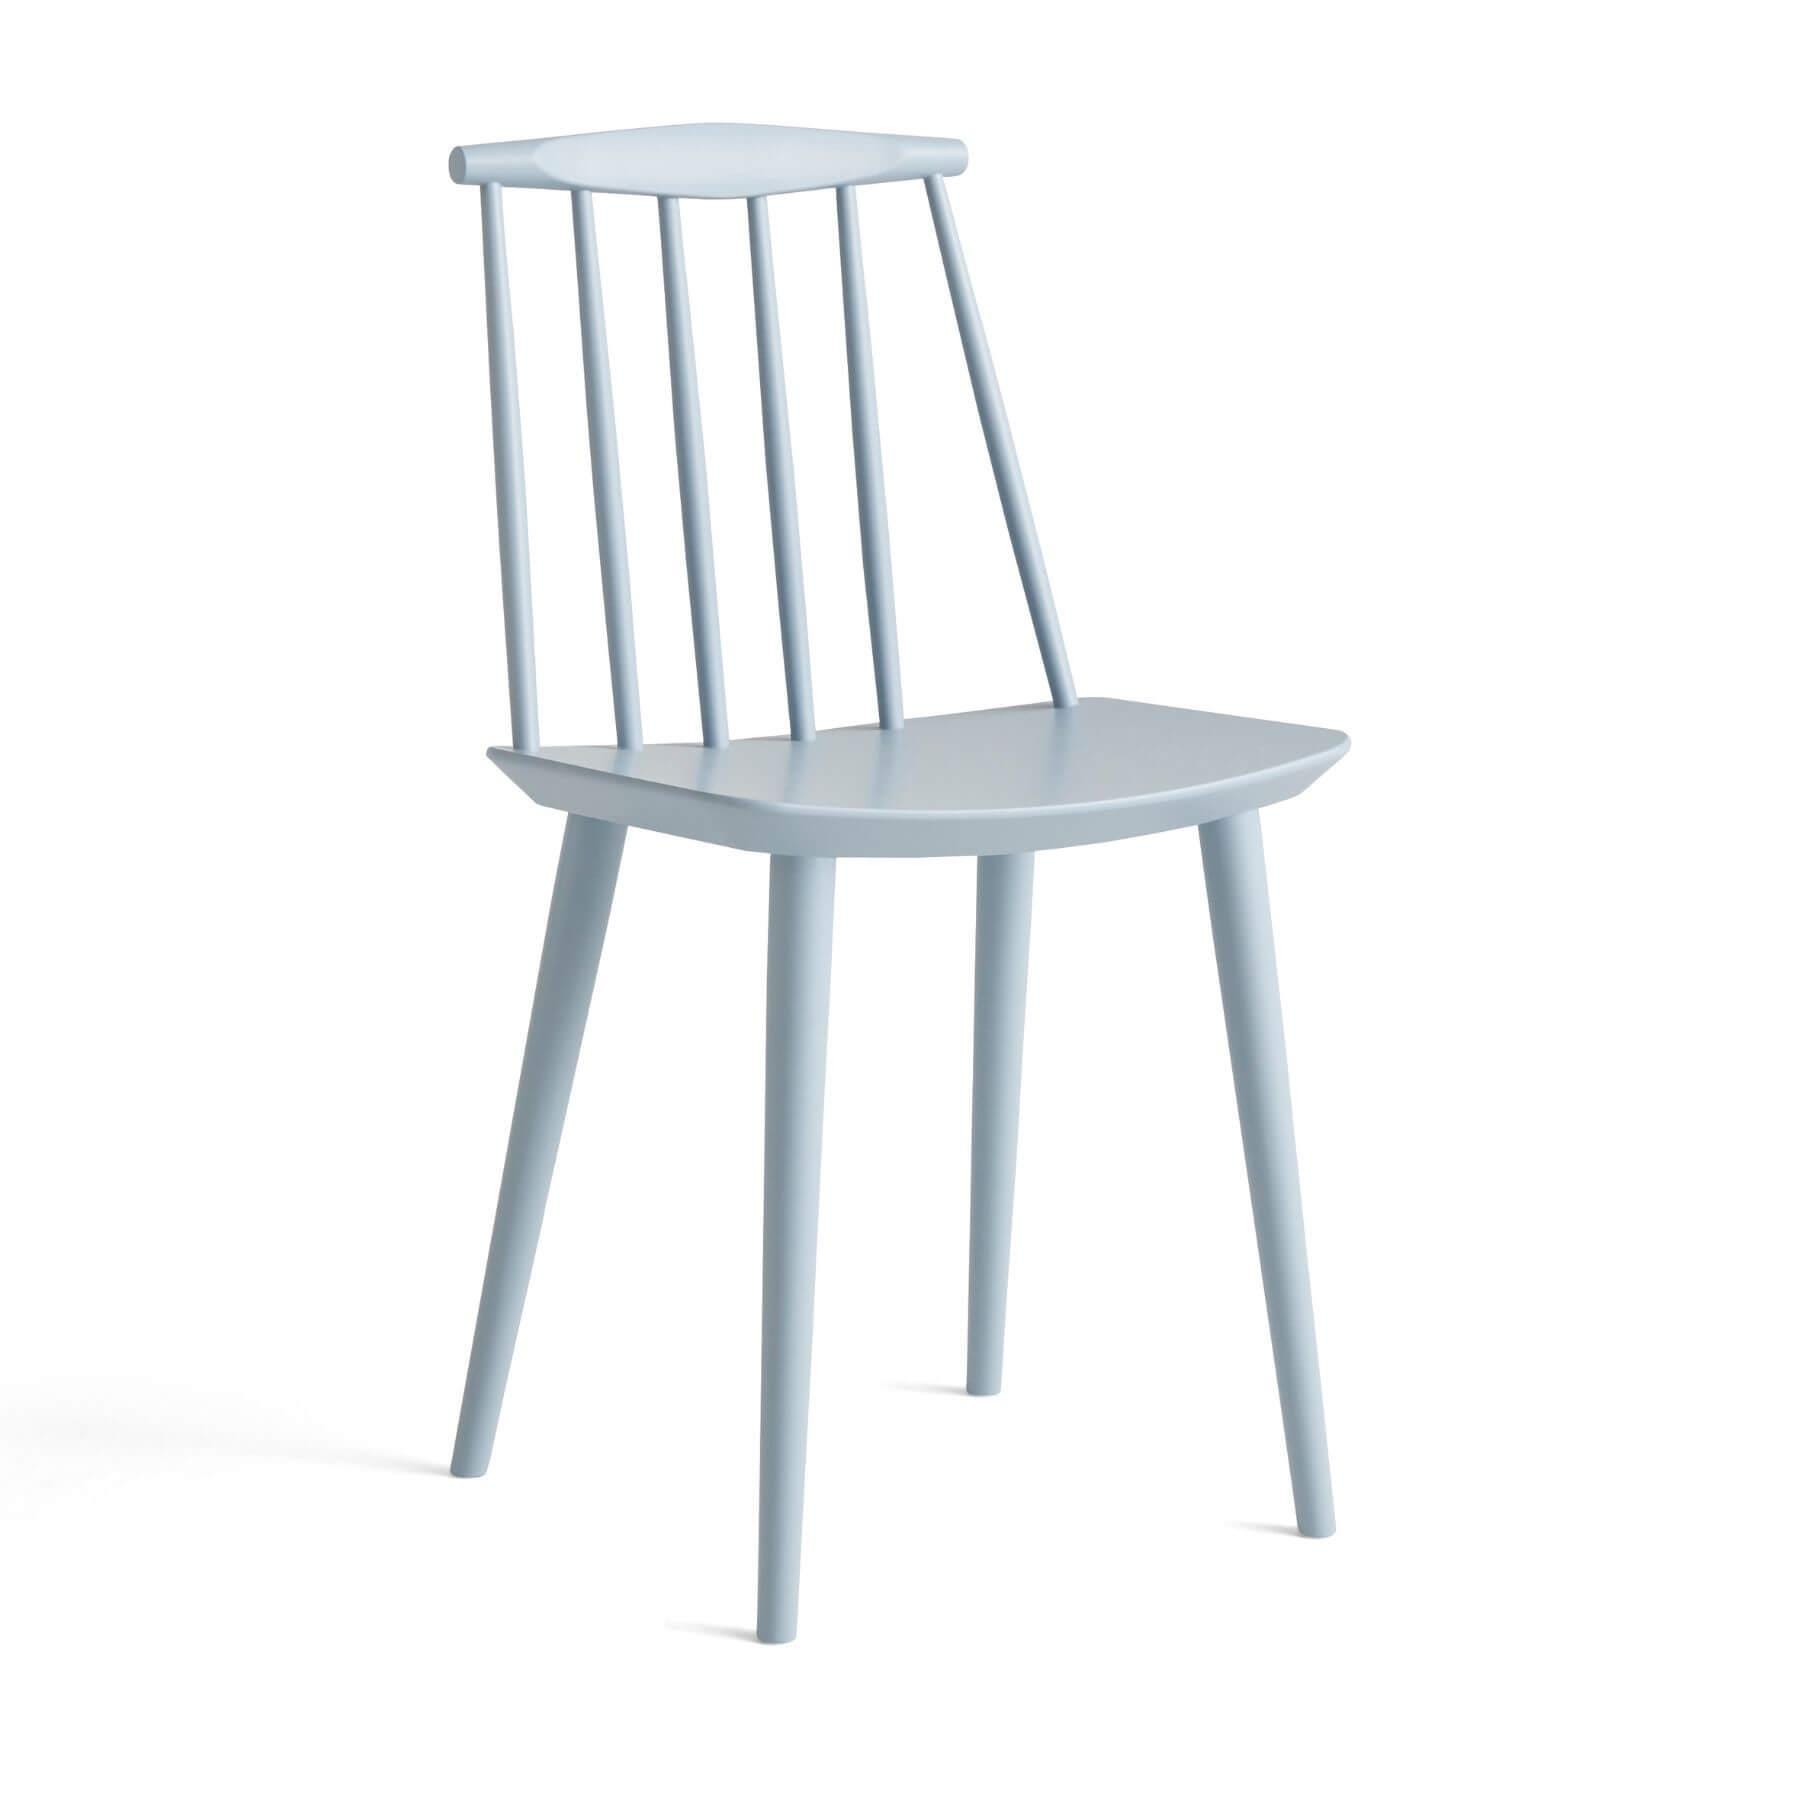 Hay Jseries 77 Dining Chair Beech Lacquered Slate Blue Felt Gliders Designer Furniture From Holloways Of Ludlow